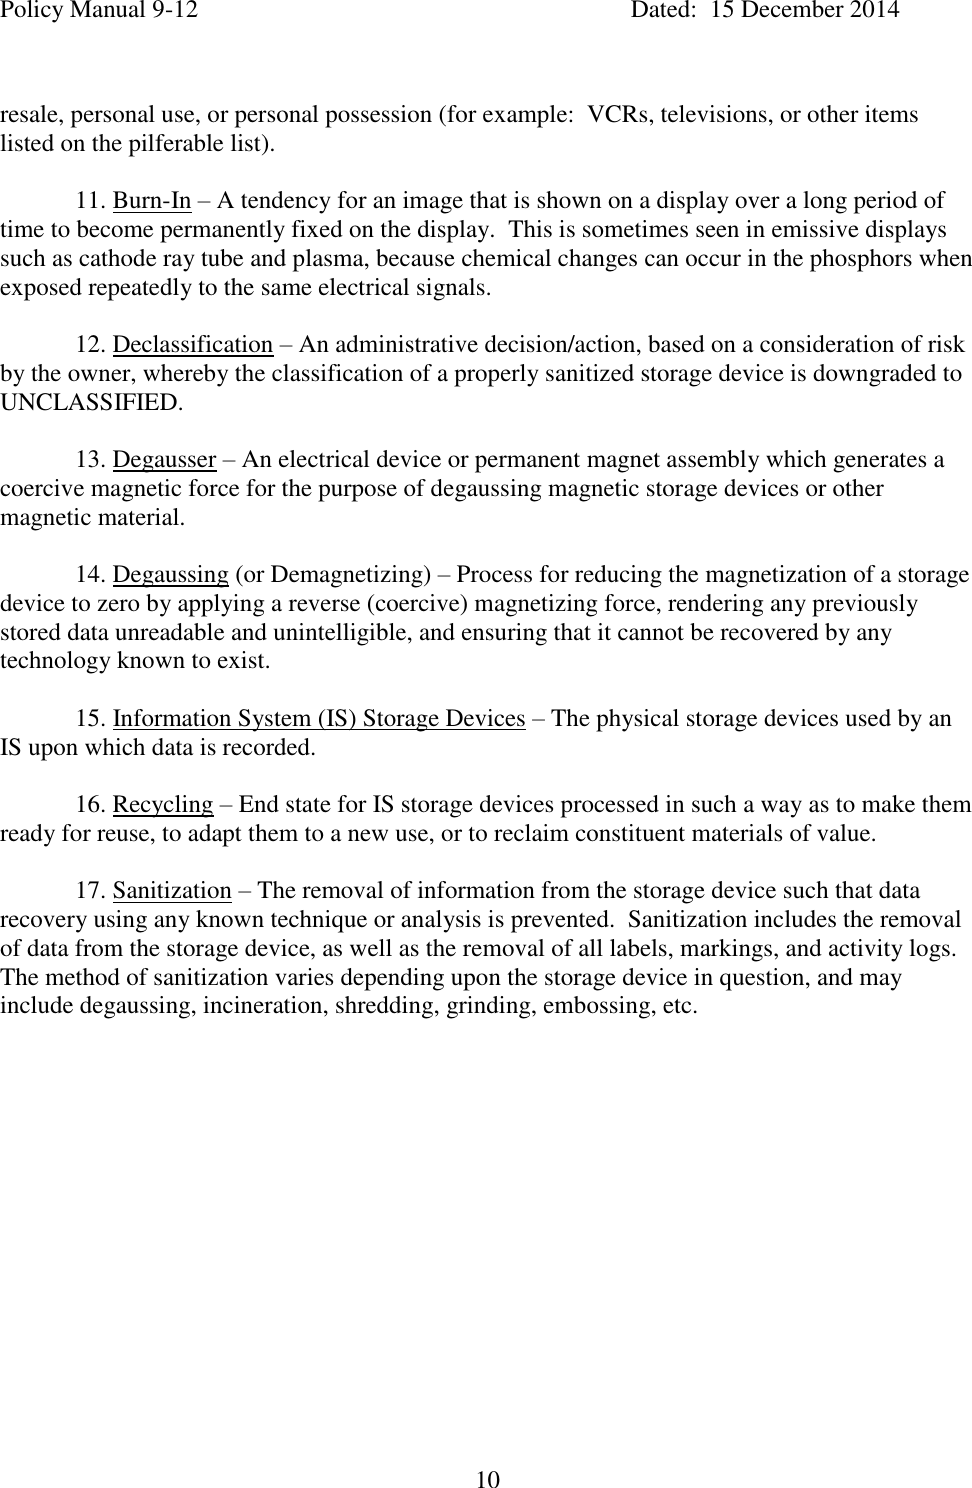 Page 10 of 10 - Storage-device-declassification-manual